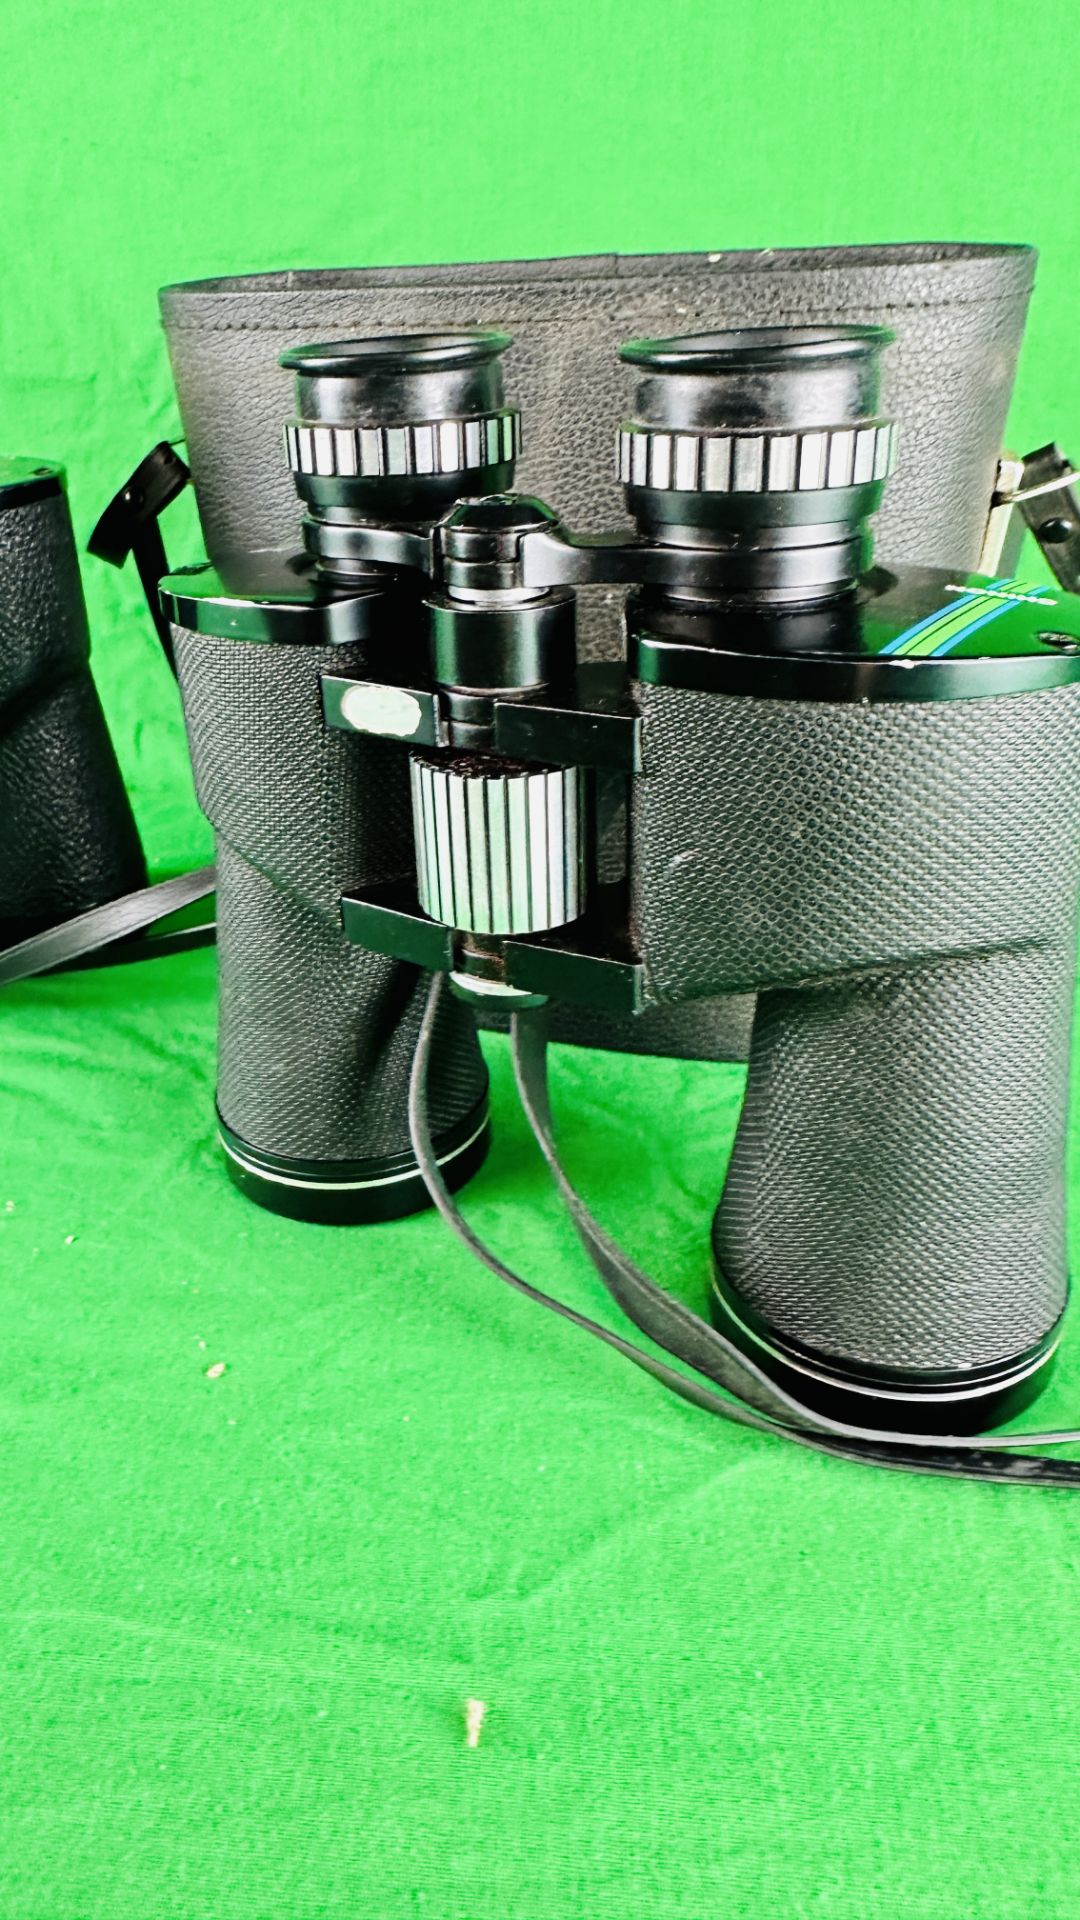 TWO PAIRS OF BINOCULARS INCLUDING CHINON 10X50 FIELD AND CHINON 6X50 - Image 4 of 10